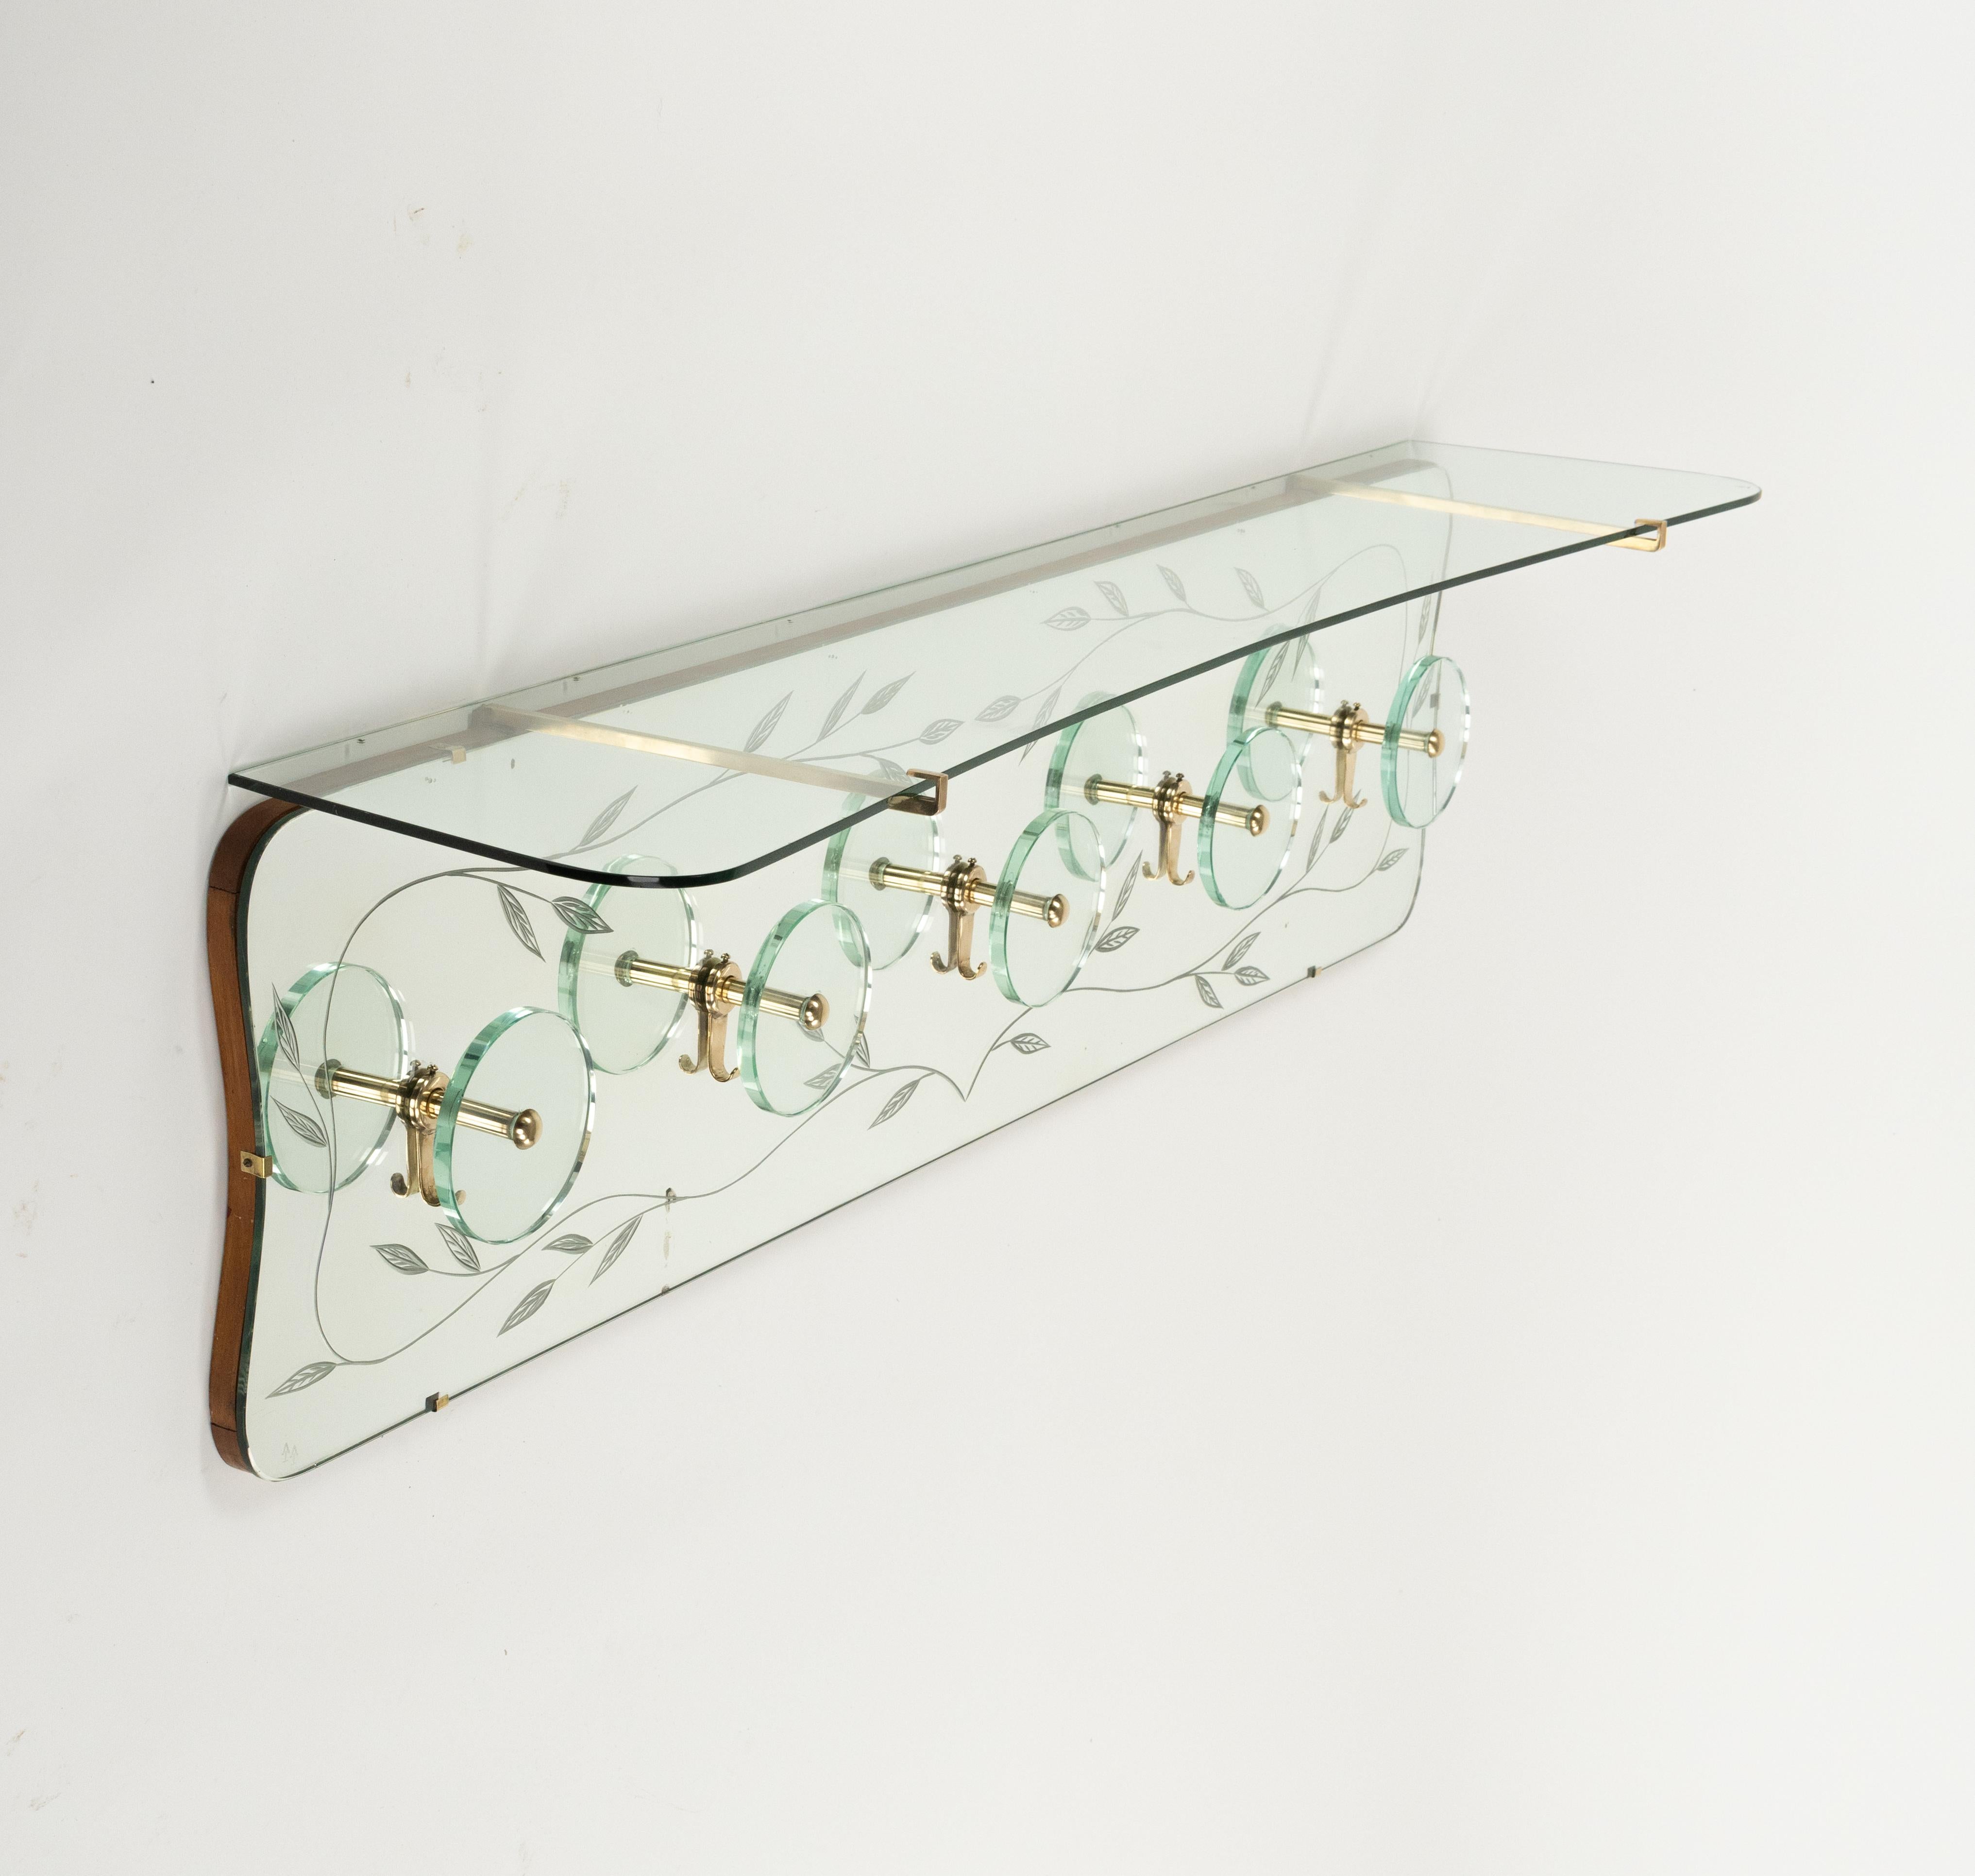 Midcentury Coat Rack Shelf in Mirror, Brass & Glass by Cristal Art, Italy, 1950s For Sale 1